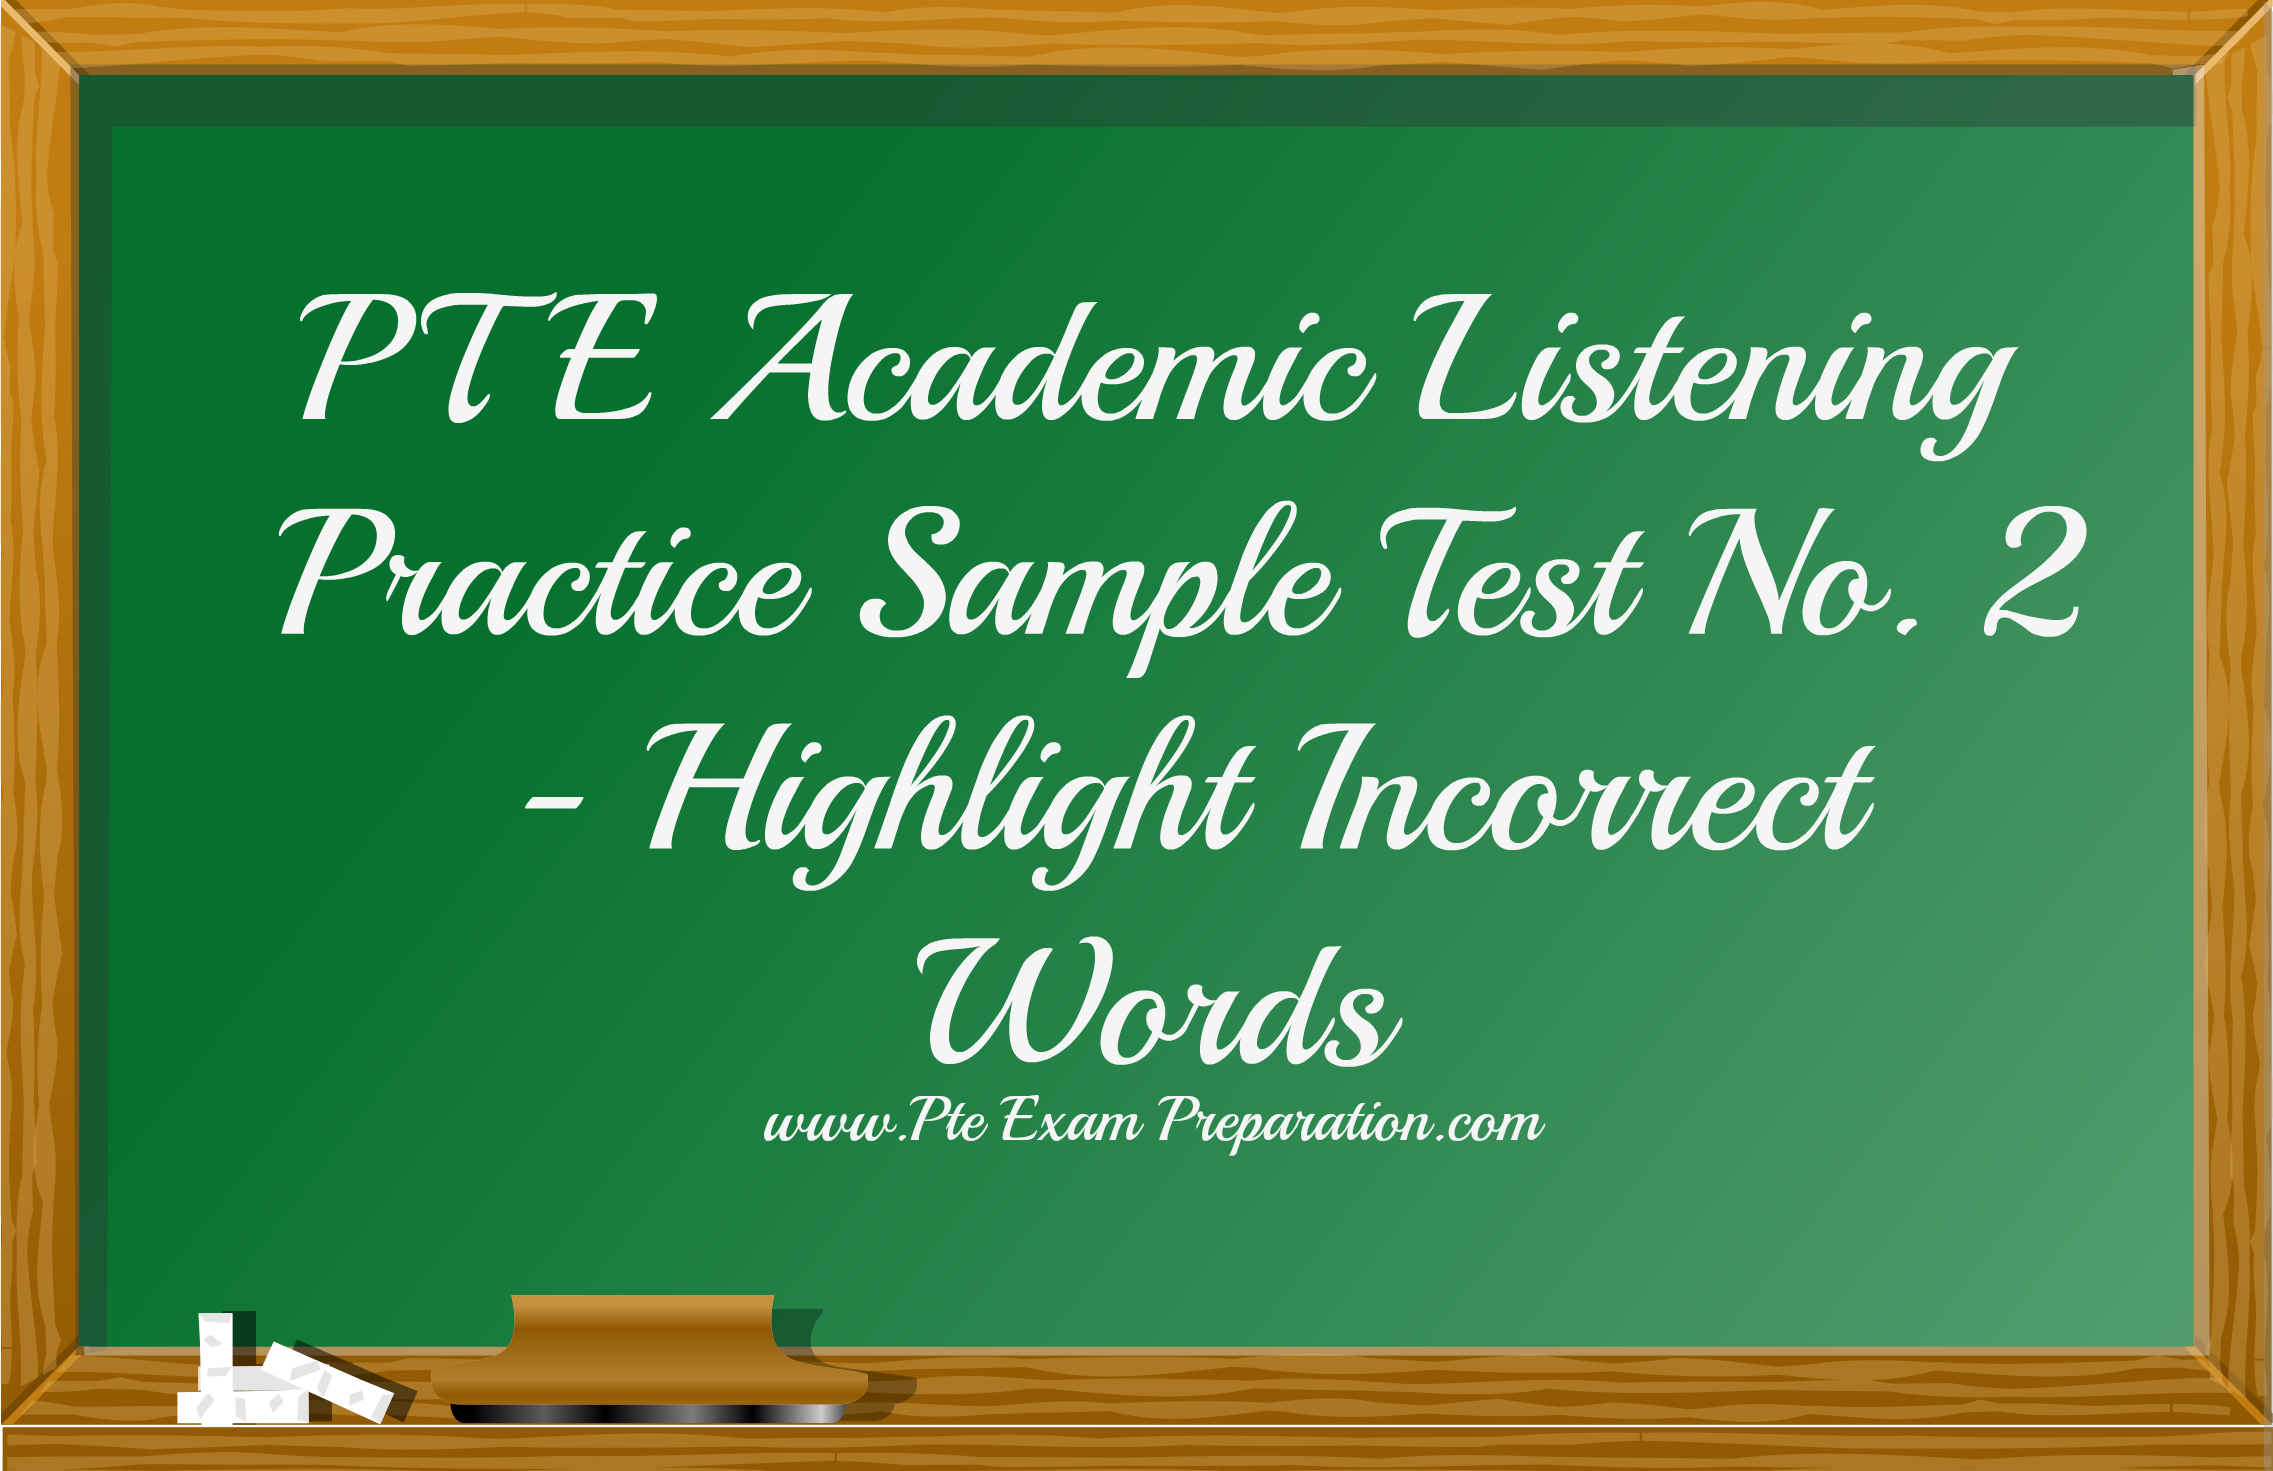 PTE Academic Listening Practice Sample Test No. 2 - Highlight Incorrect Words